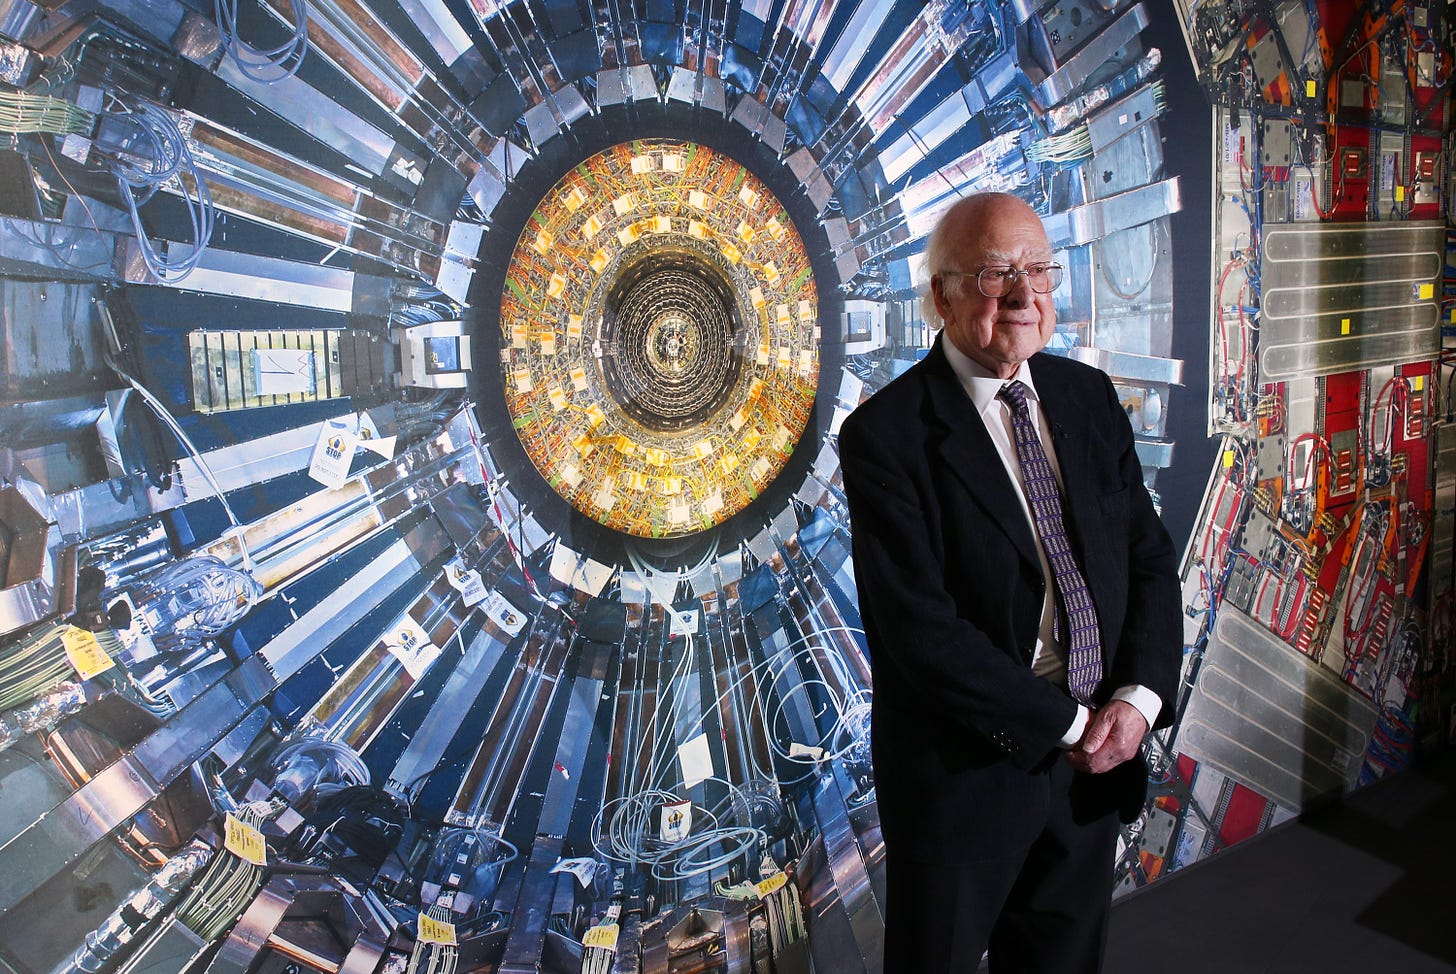 Mr. Peter Higgs in front of an image of one of the Large Hadron Colliders. Source: Photo by Peter Macdiarmid/Getty Images.